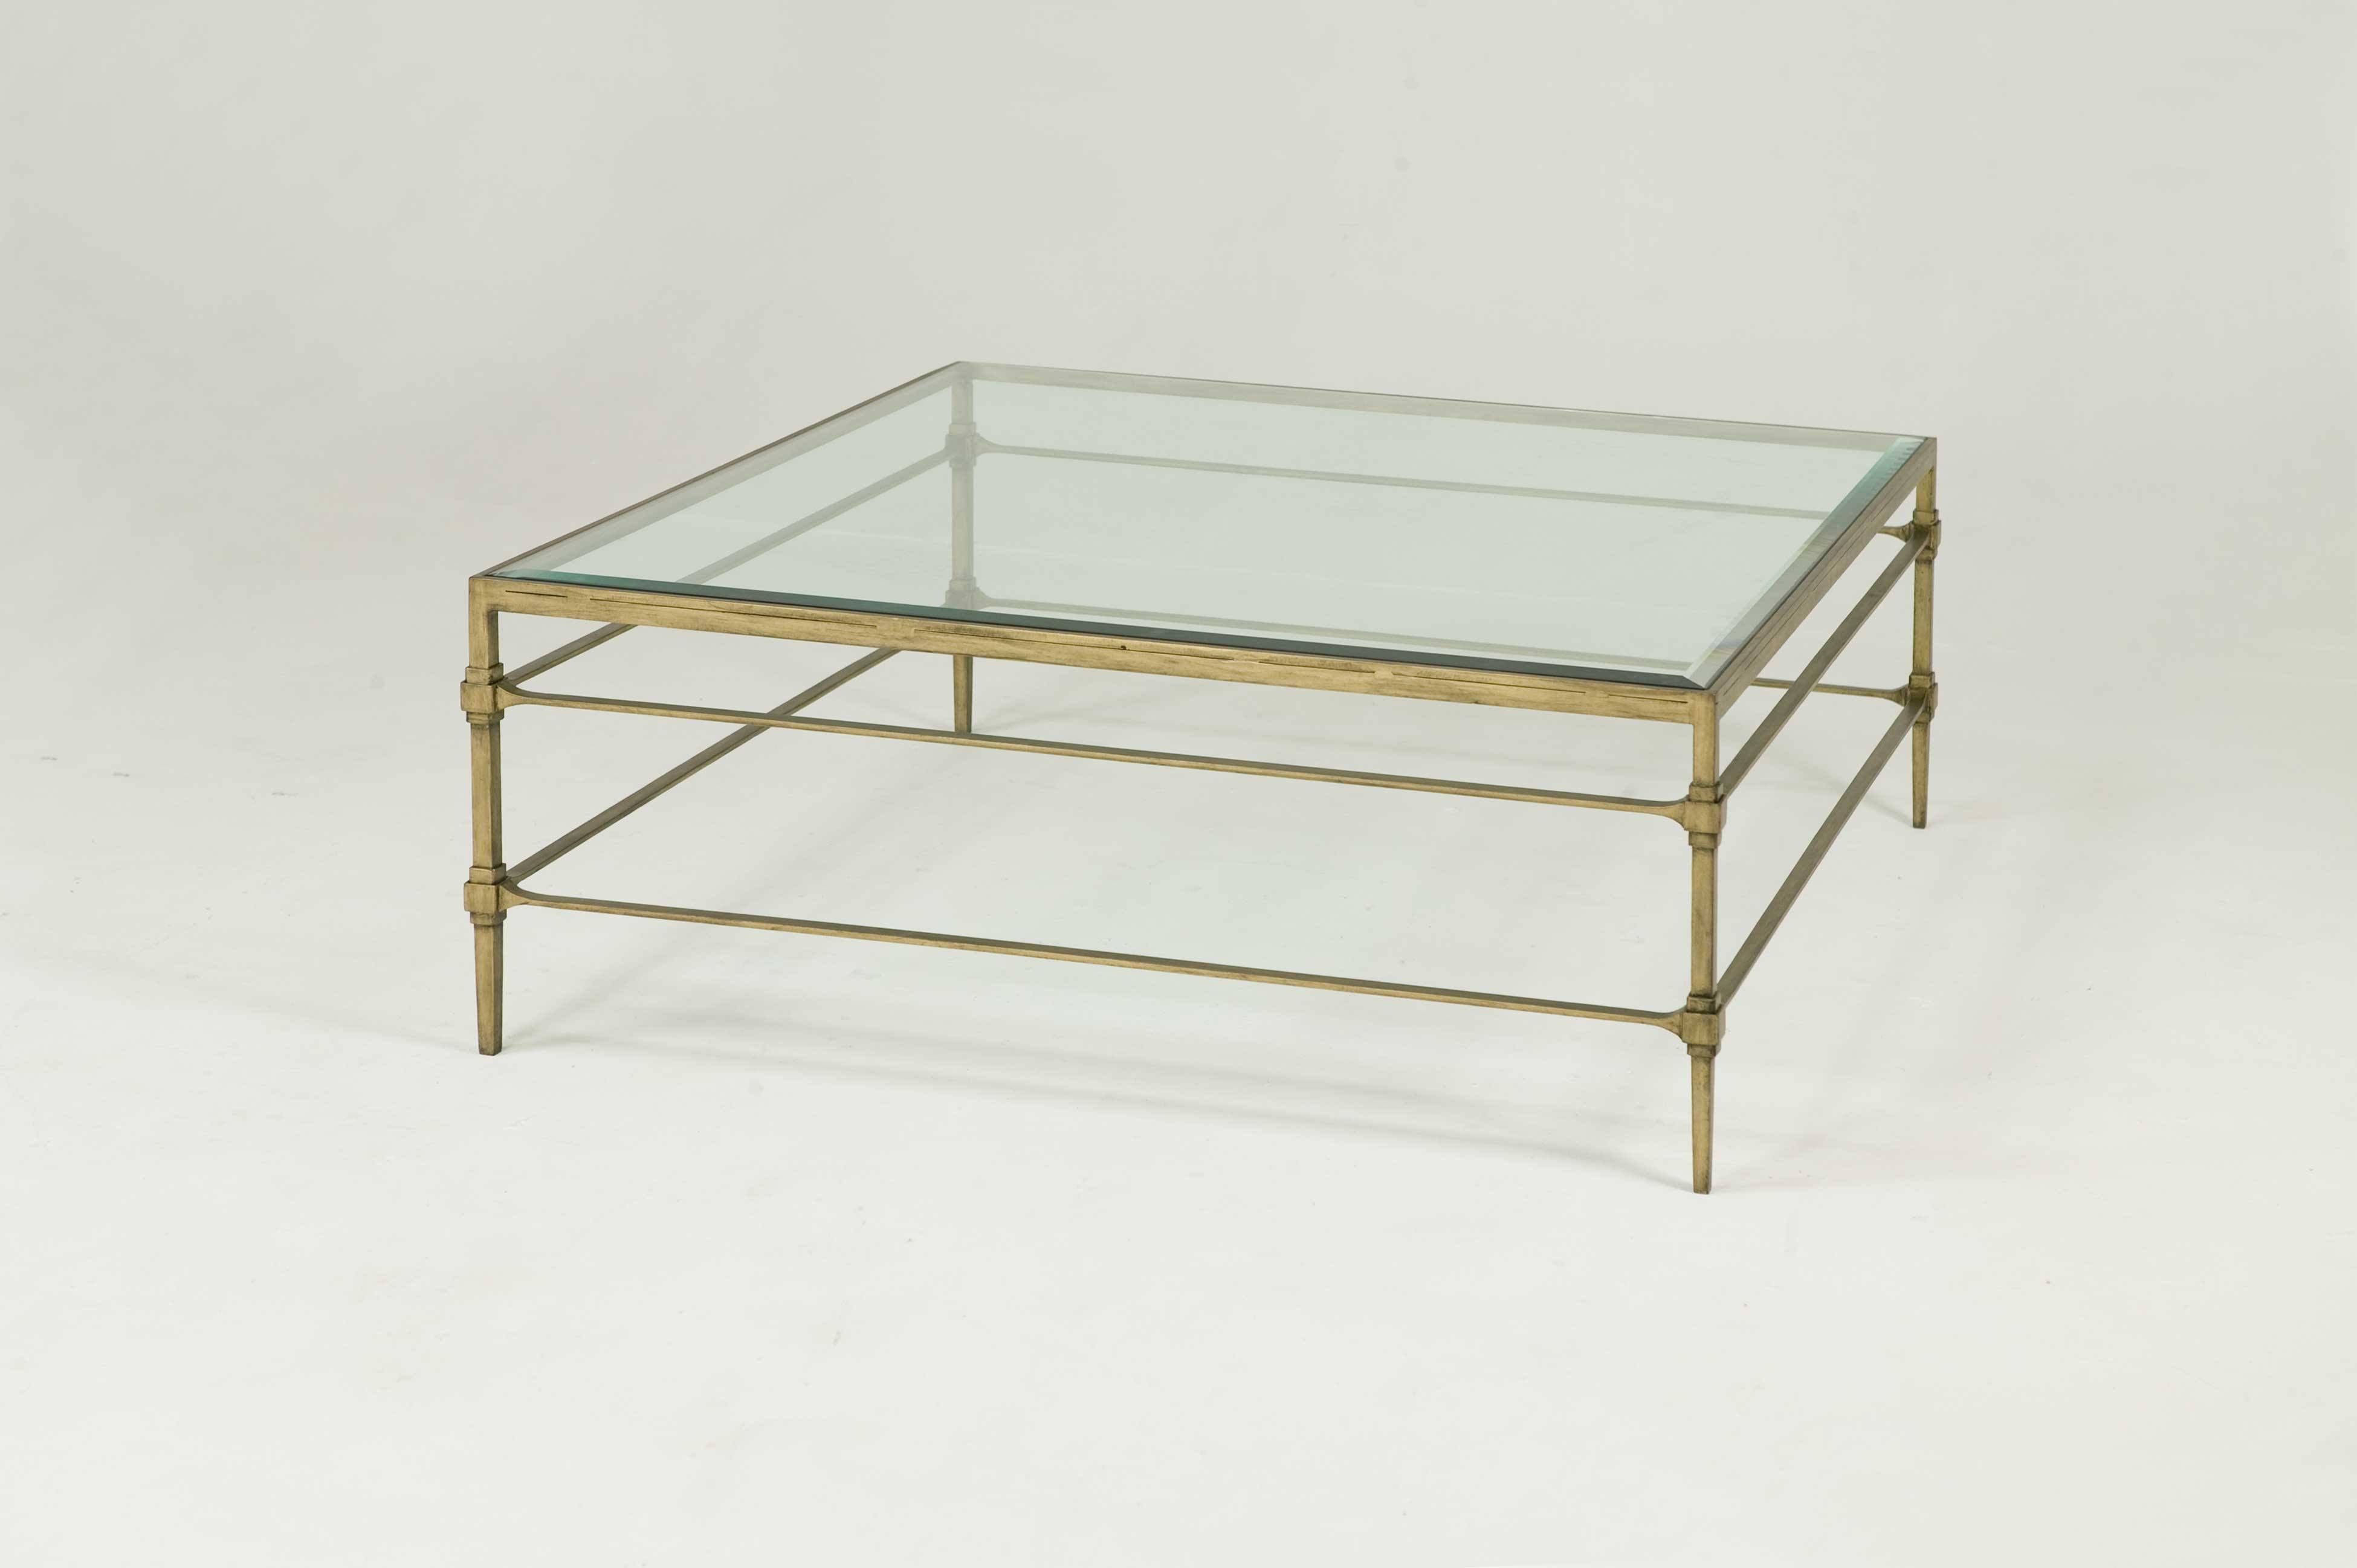 Coffee Table: Astounding Rectangular Glass Coffee Table With Shelf In Metal Square Coffee Tables (View 9 of 30)